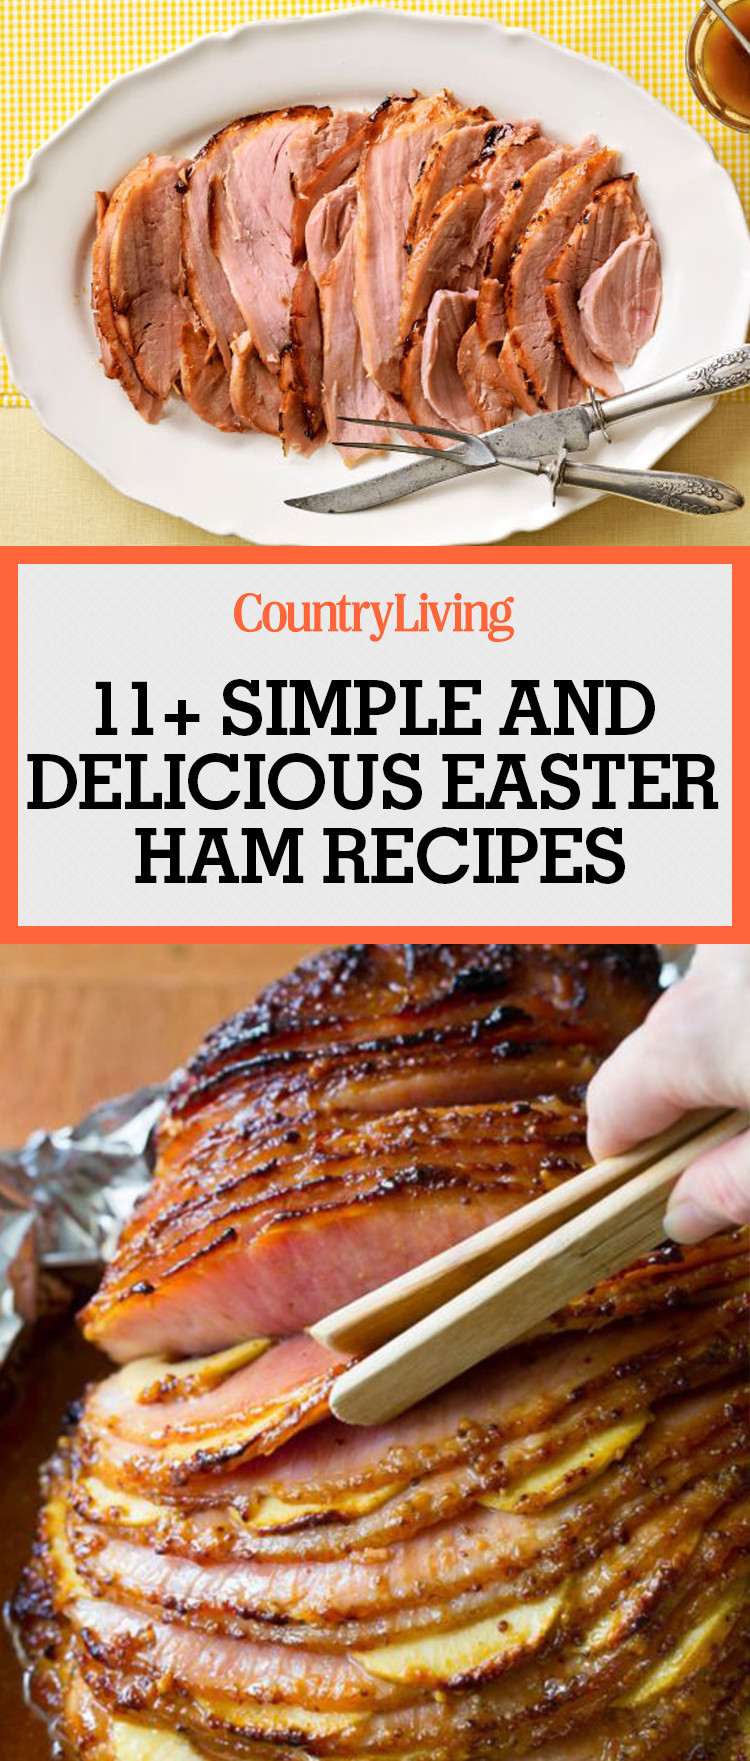 Recipes For Easter Ham
 11 Best Easter Ham Recipes How to Make an Easter Ham